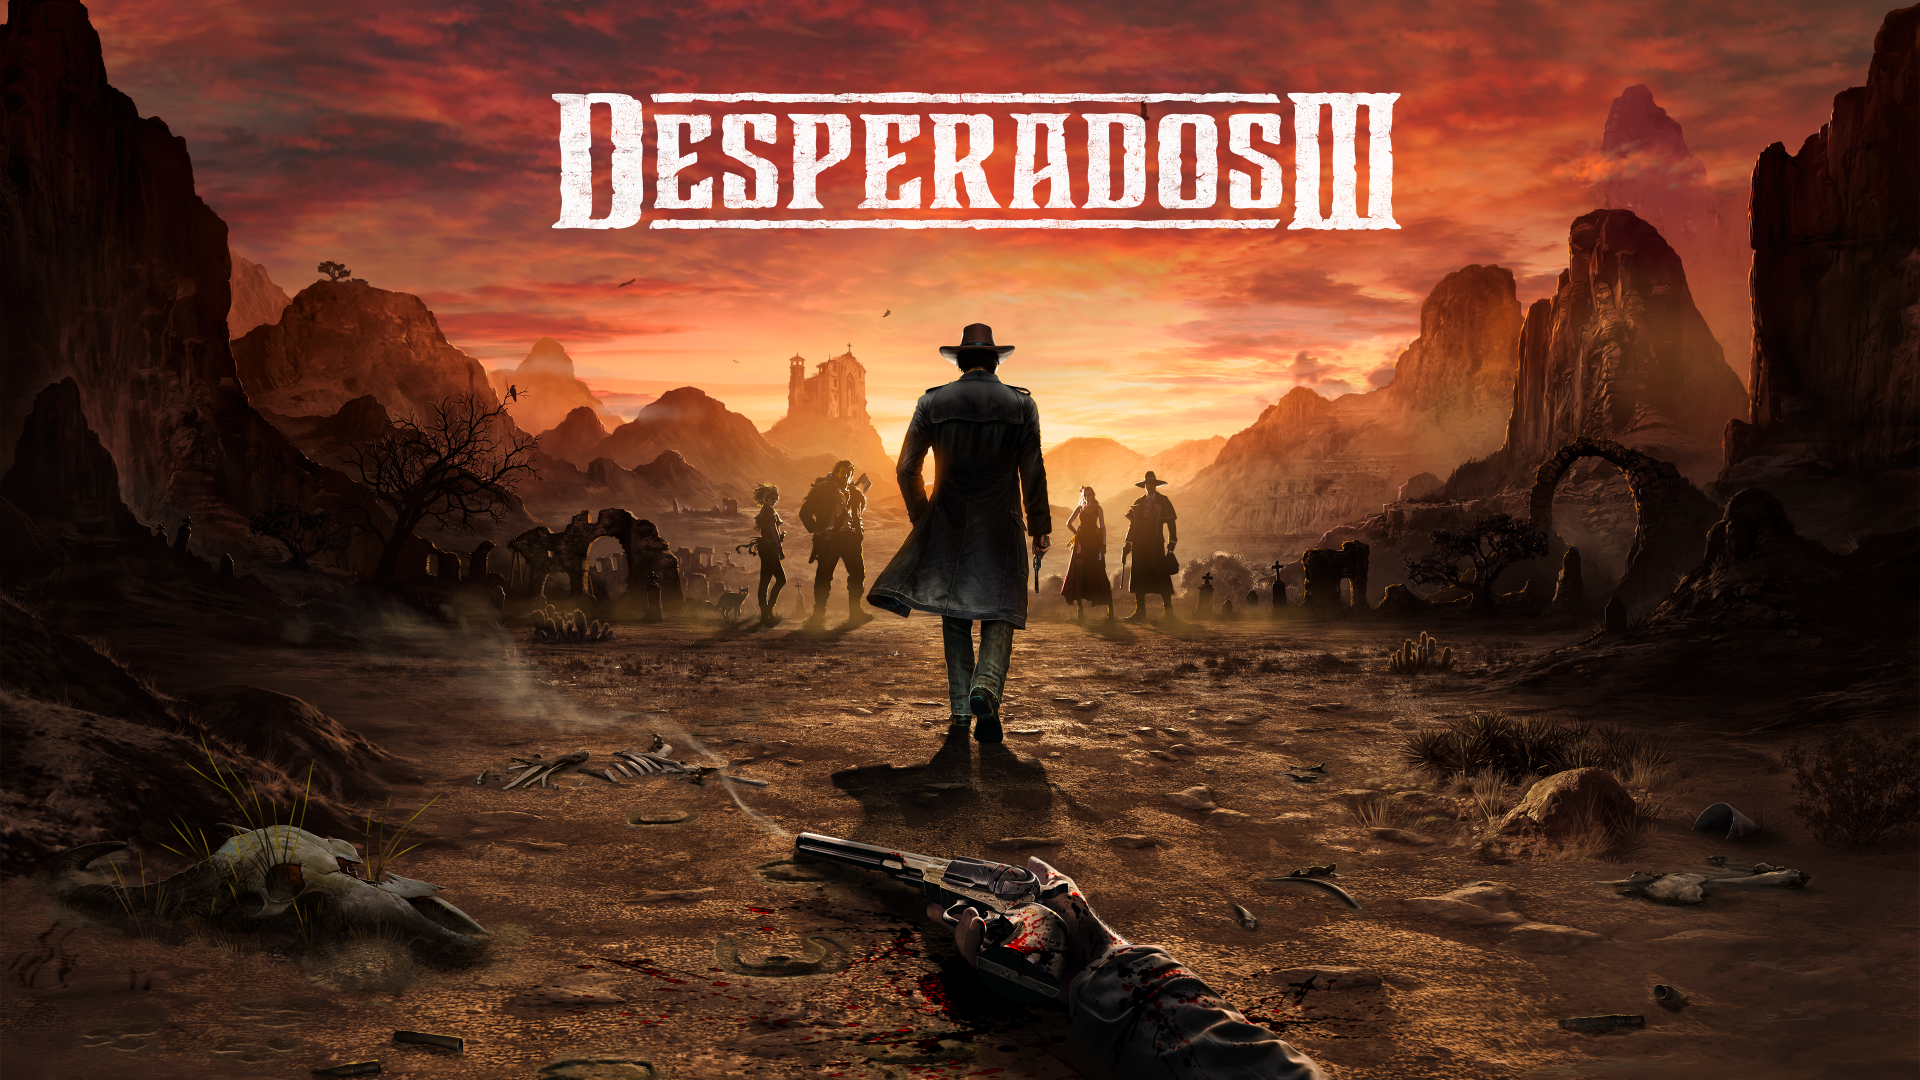 Desperados III Adds Bounty Mode and “Level Editor Light” In Free Update